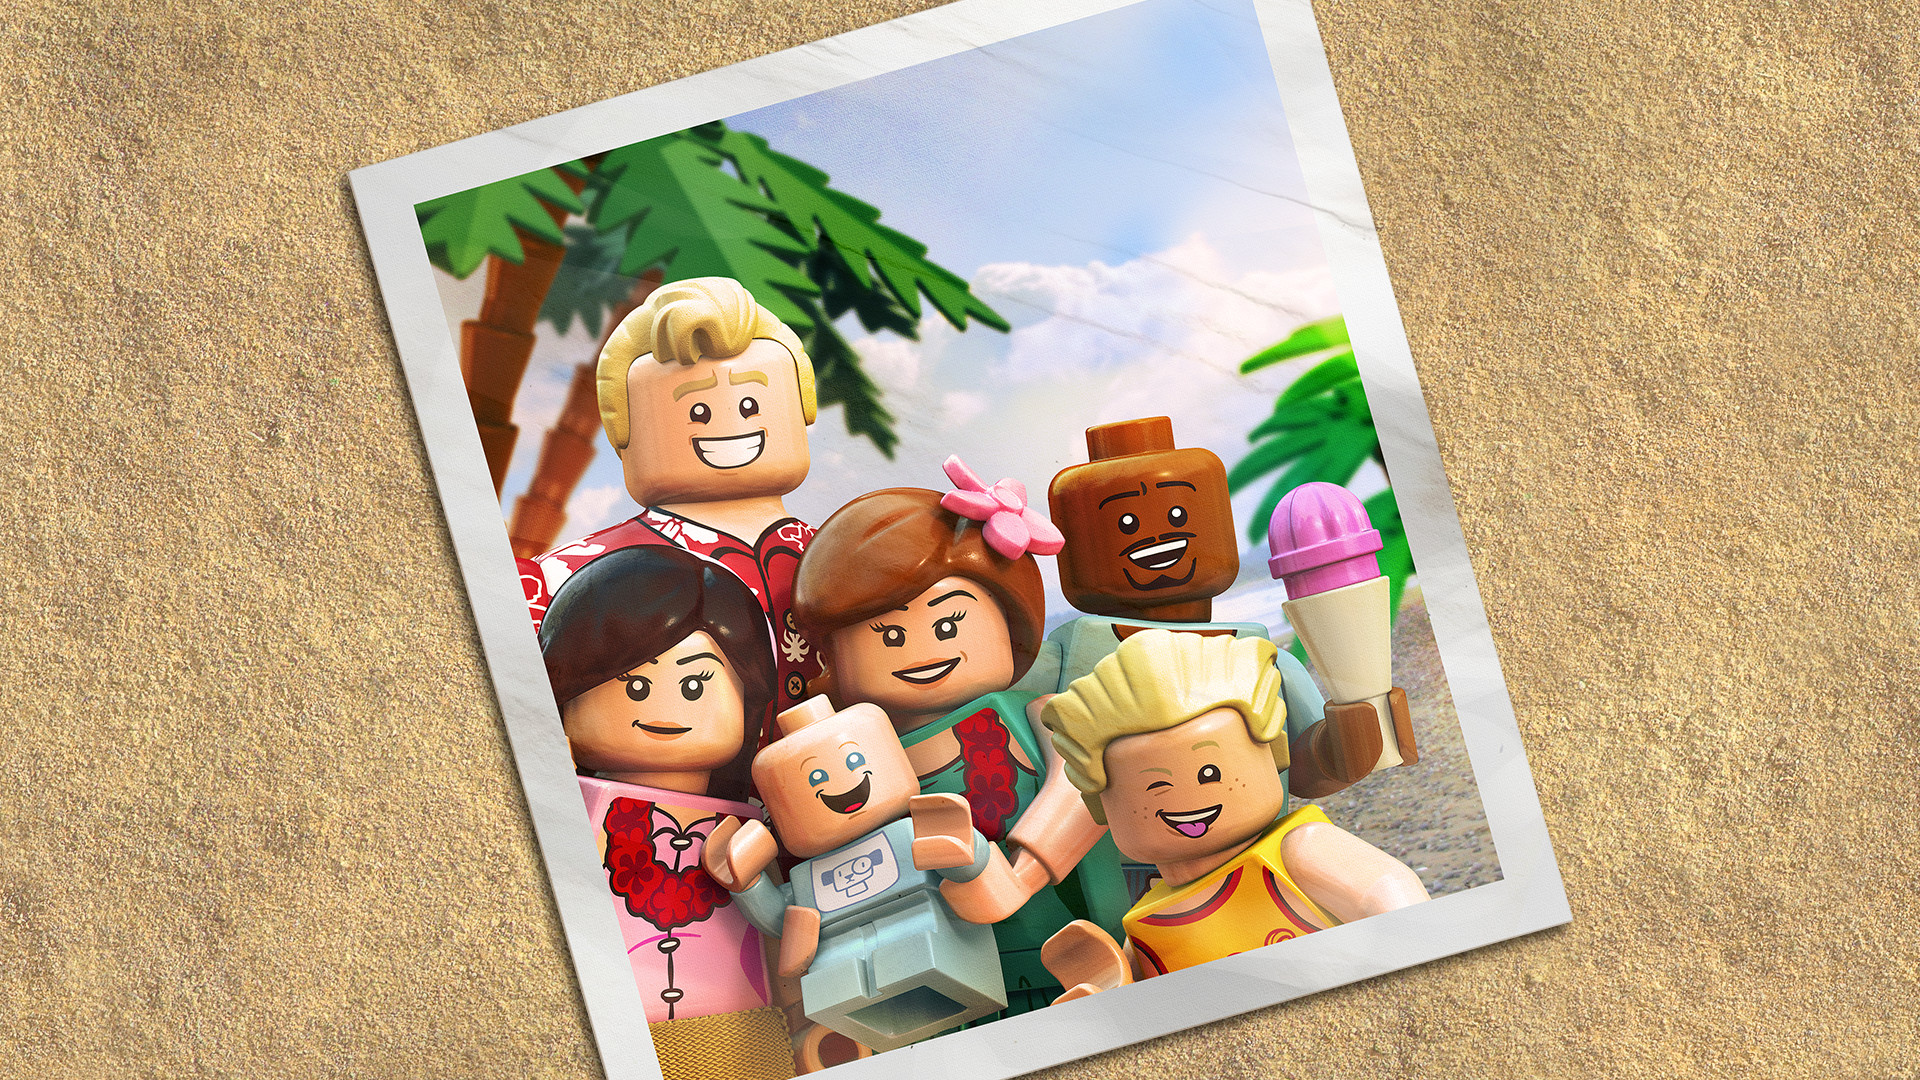 LEGO THE INCREDIBLES - Parr Family Vacation Character Pack DLC EU PS4 CD Key [USD 1.12]